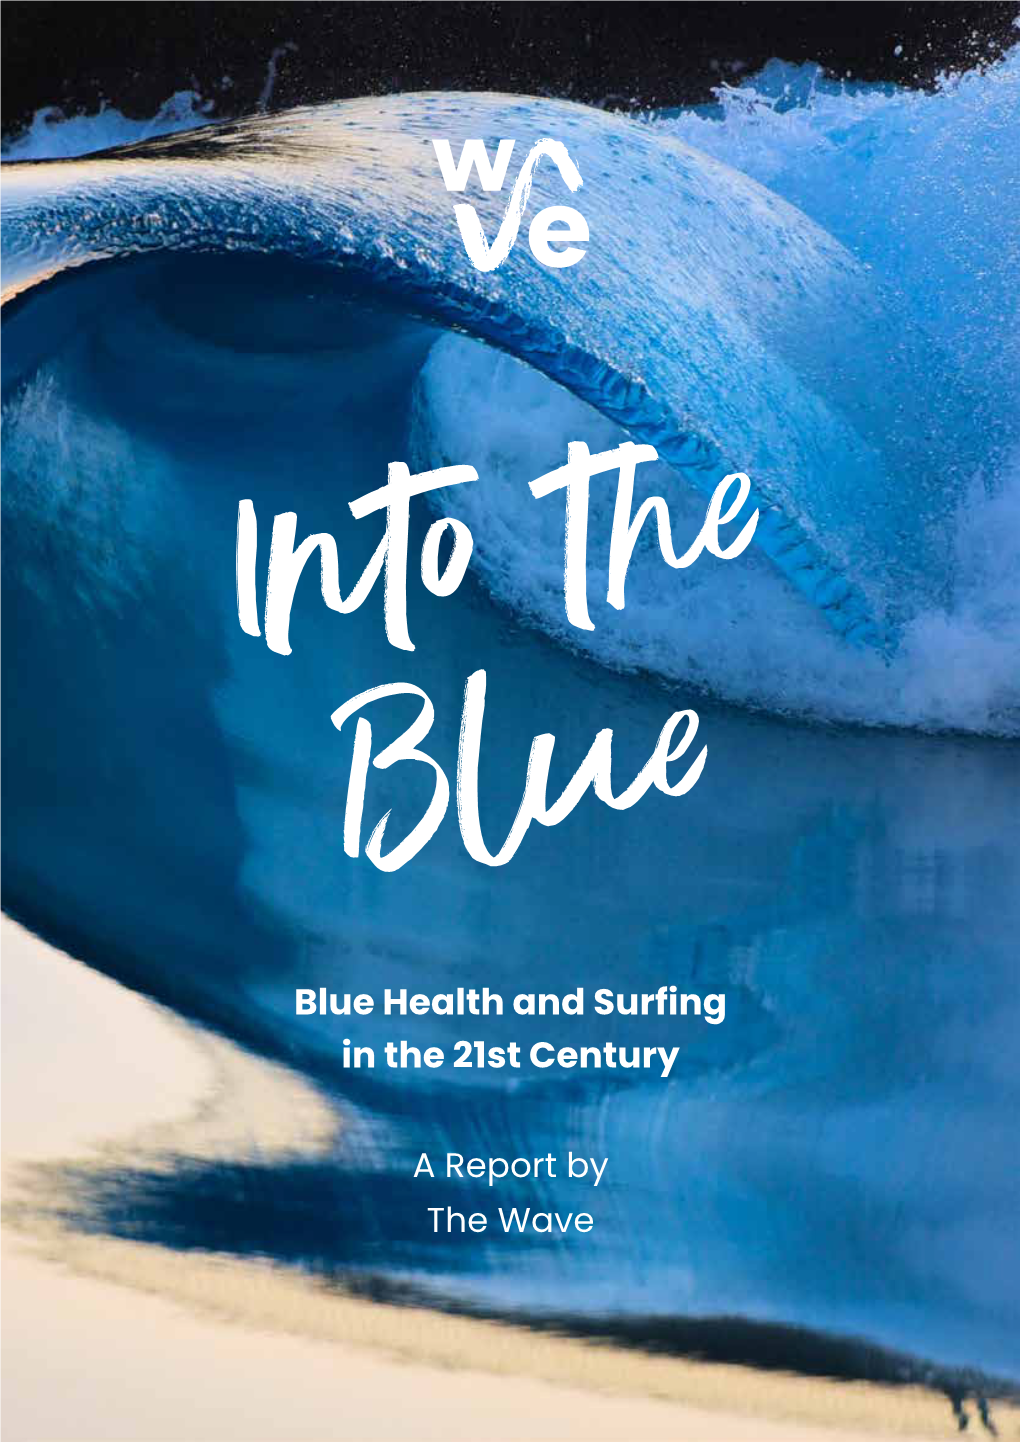 Blue Health and Surfing in the 21St Century Report